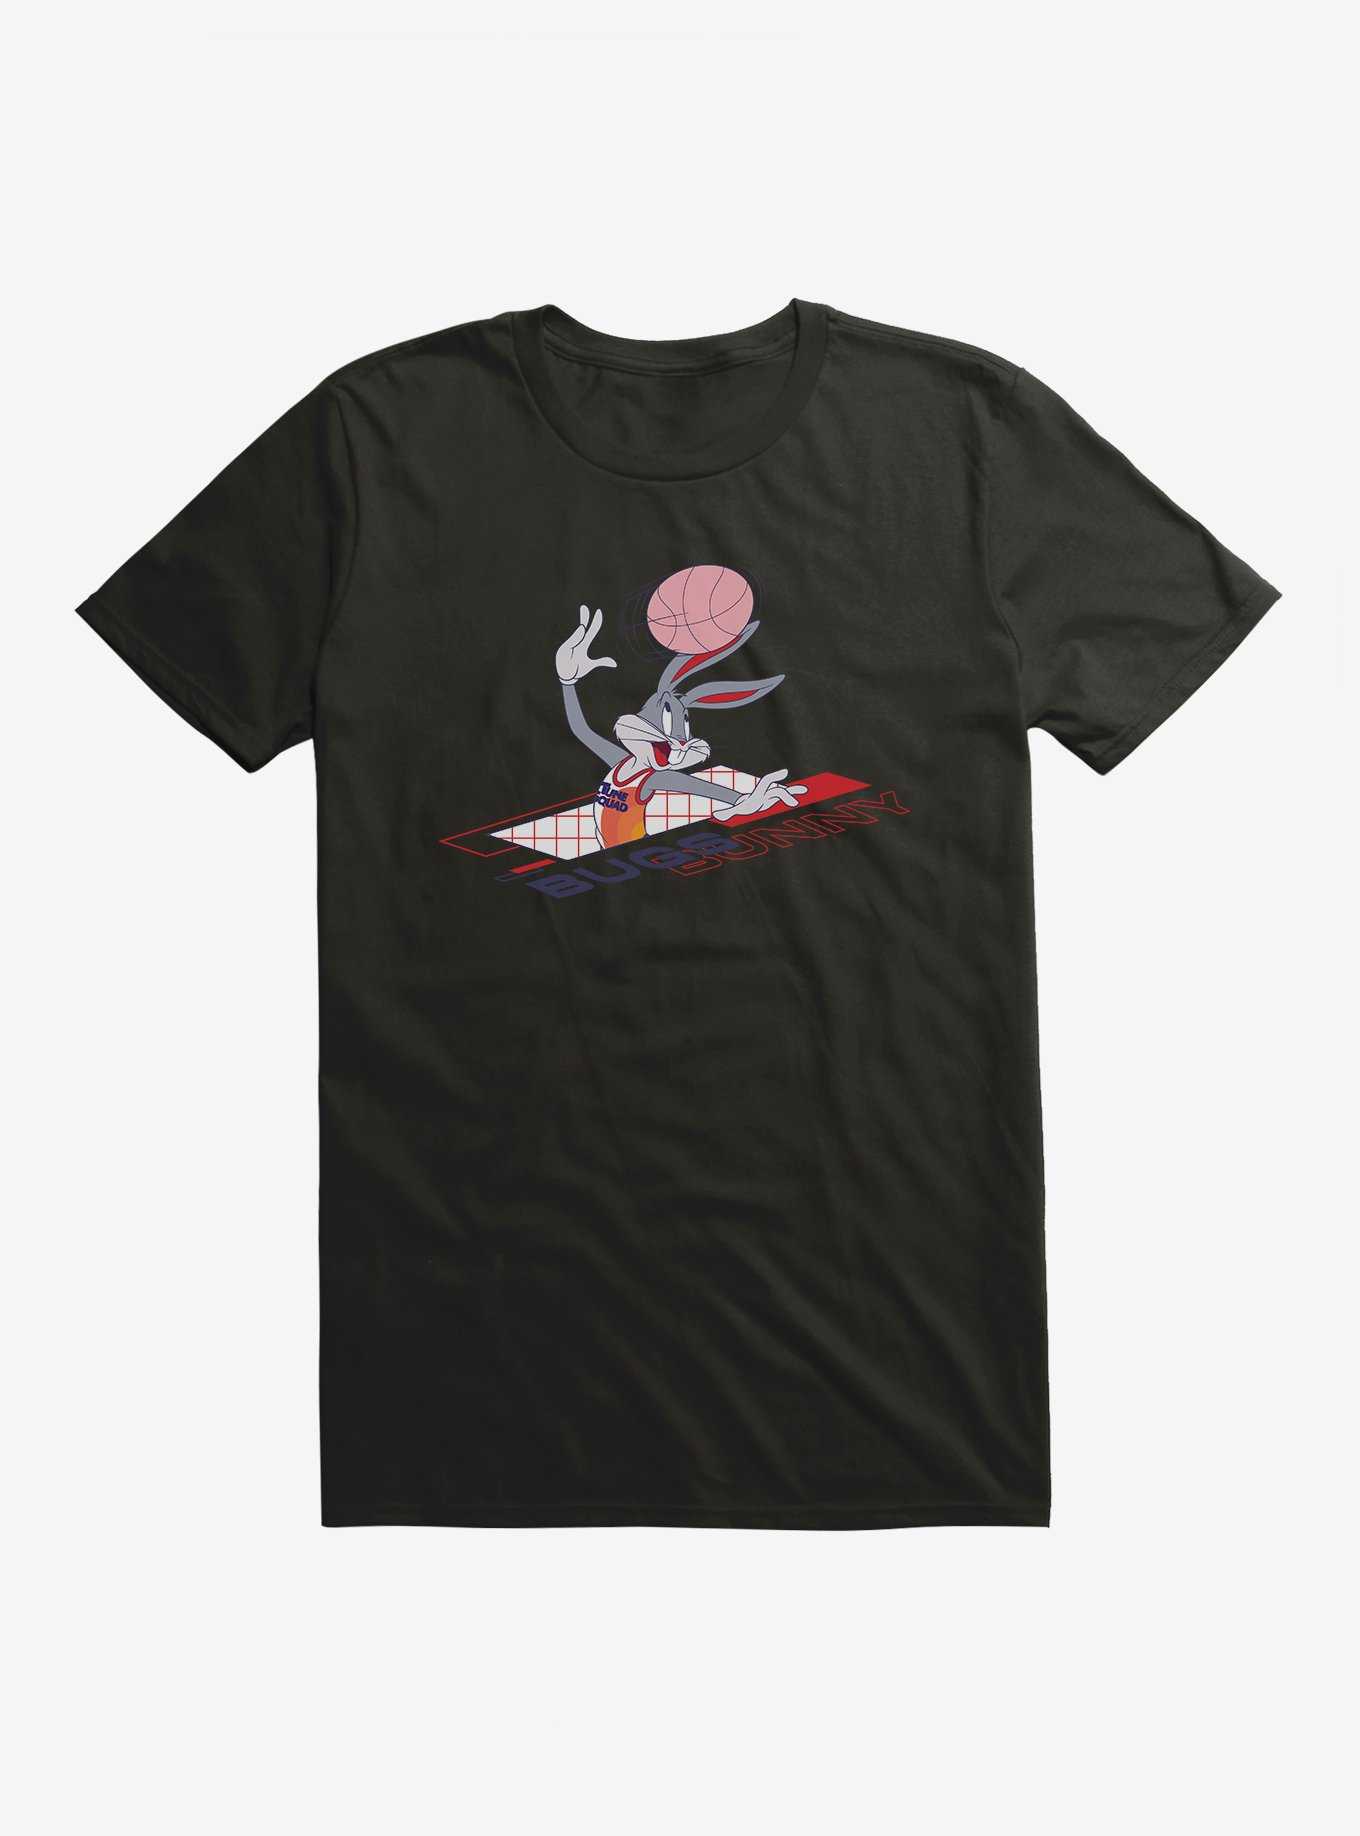 Space Jam: A New Legacy Bugs Bunny Leaving The Grid T-Shirt, , hi-res